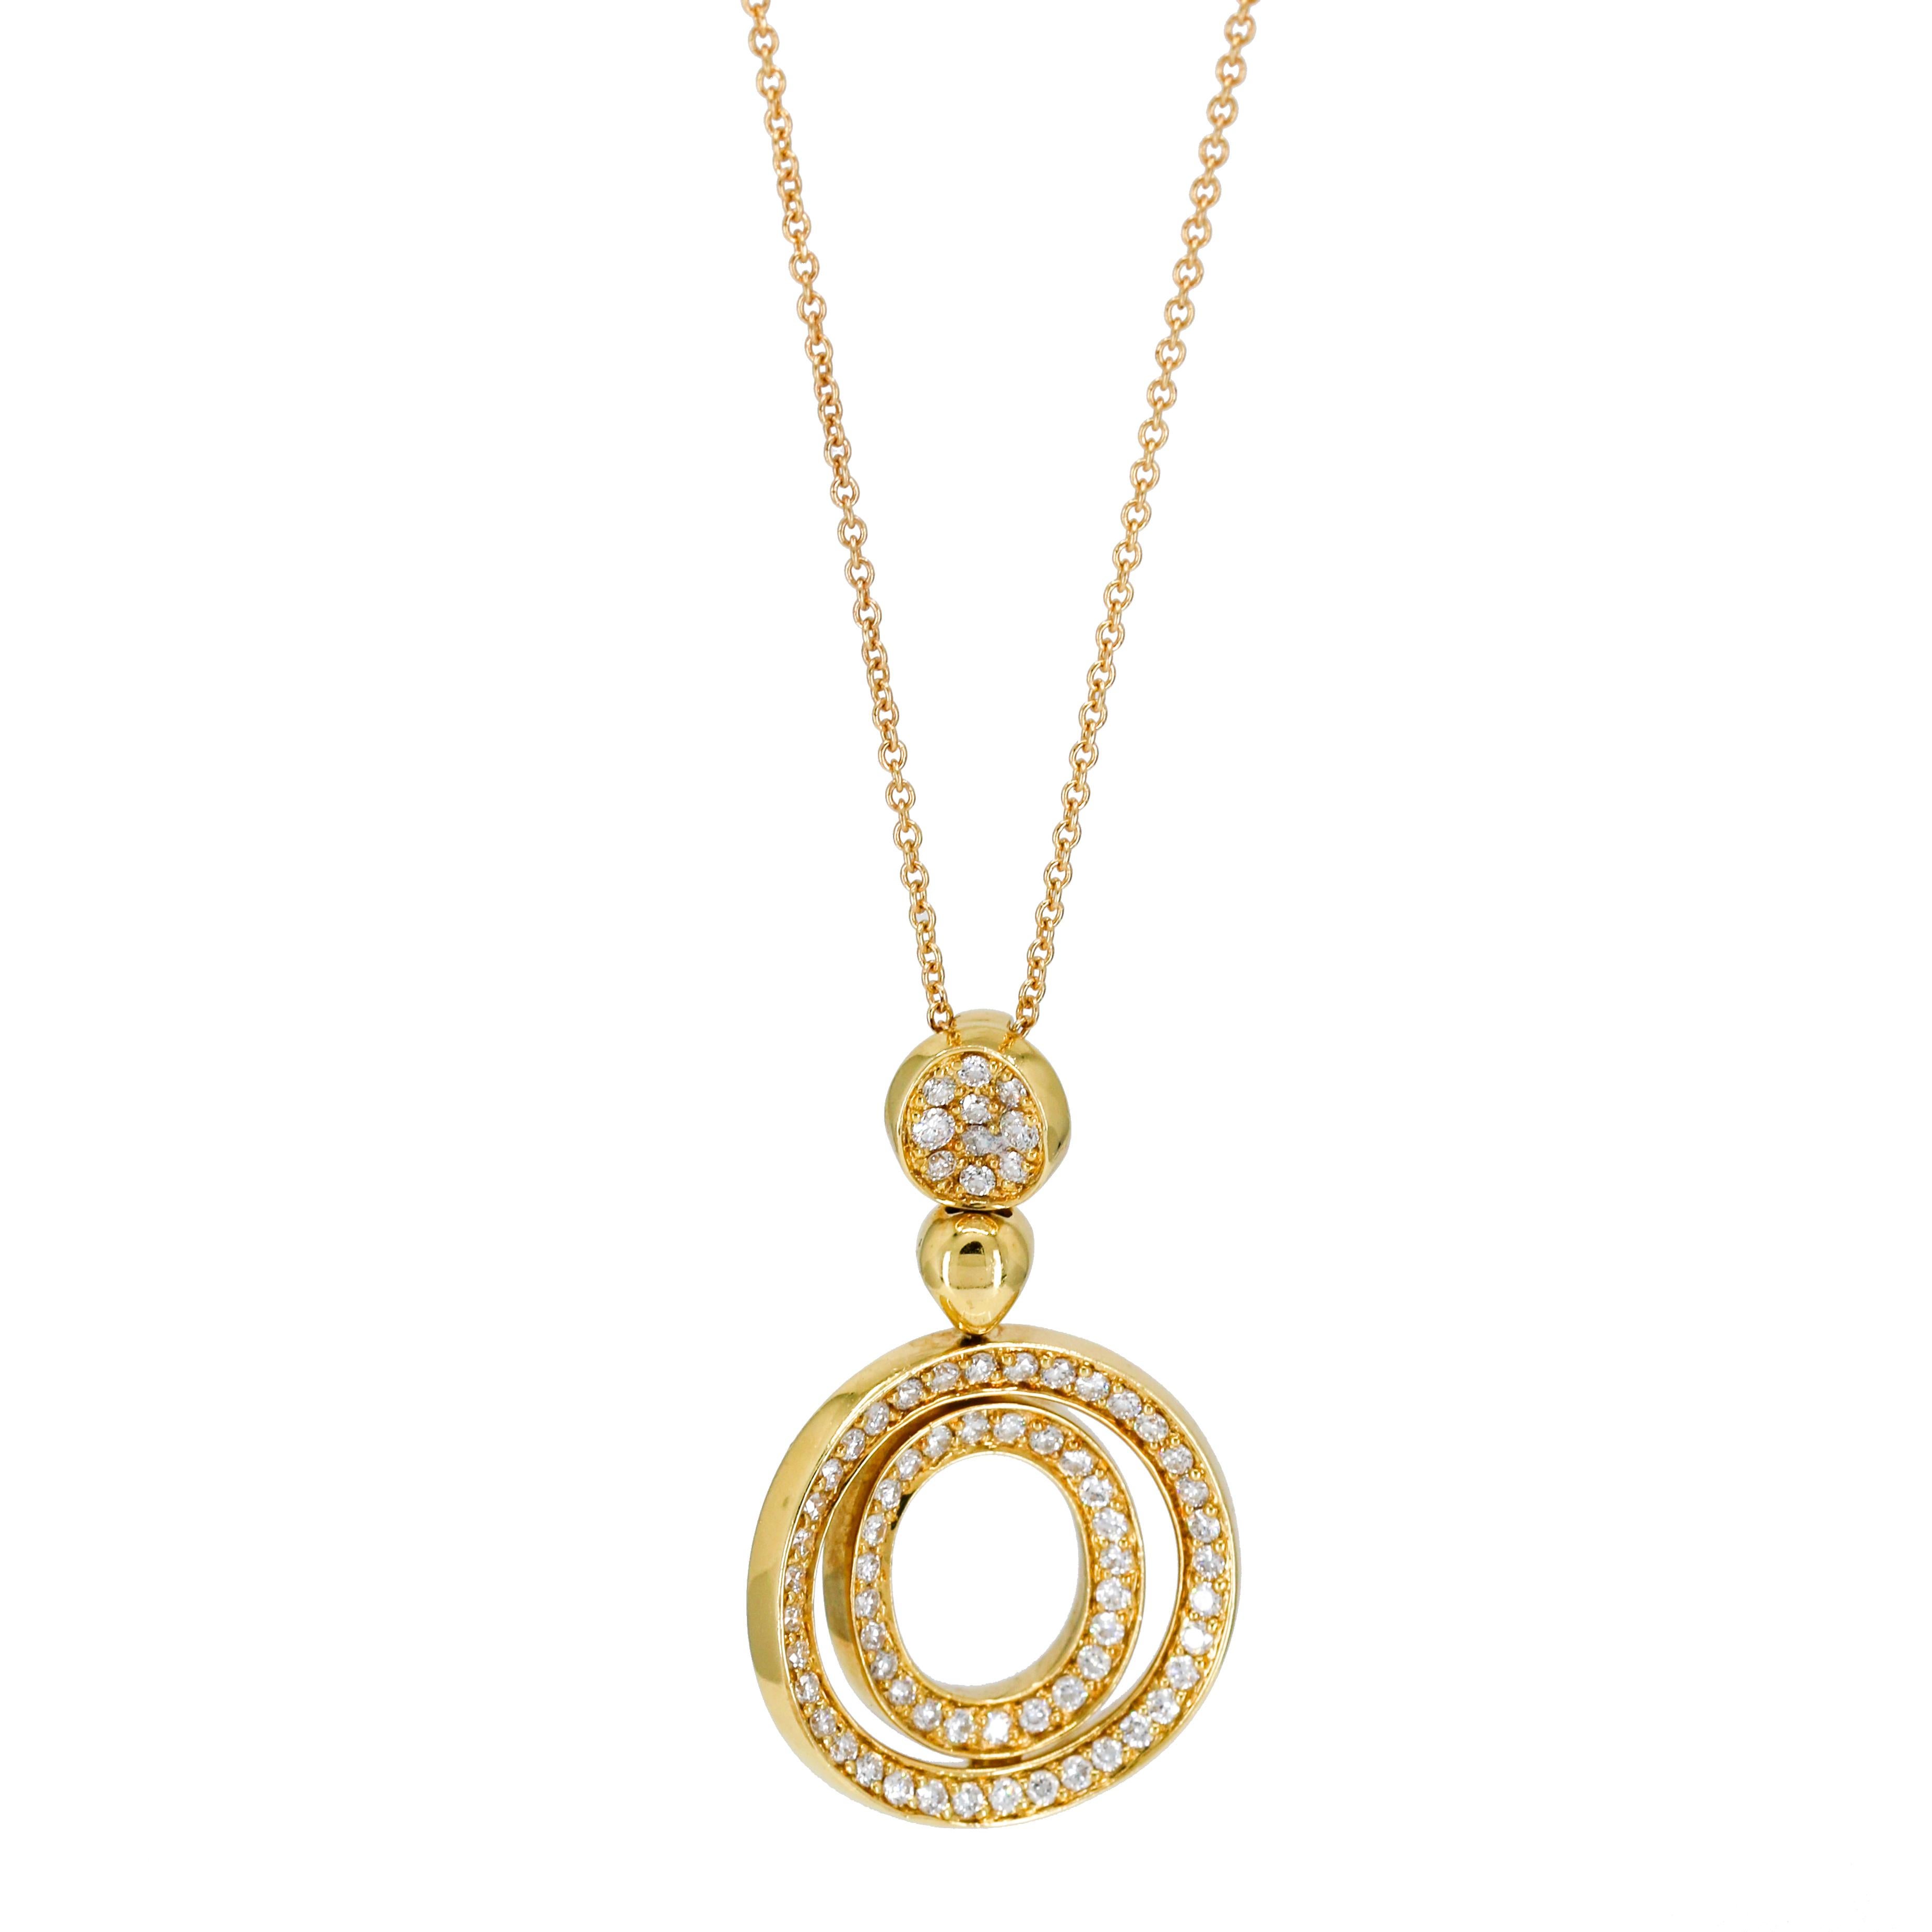 Round drop pendant necklace in 18-karat yellow gold with diamonds. 

Length, 18 inches 
Height, 31.5mm
Width, 19mm
Depth, 3mm
Weight, 8.5 grams
Diamond Total Carat Weight, .70 carat 

Previously owned, in excellent condition. Original packaging not